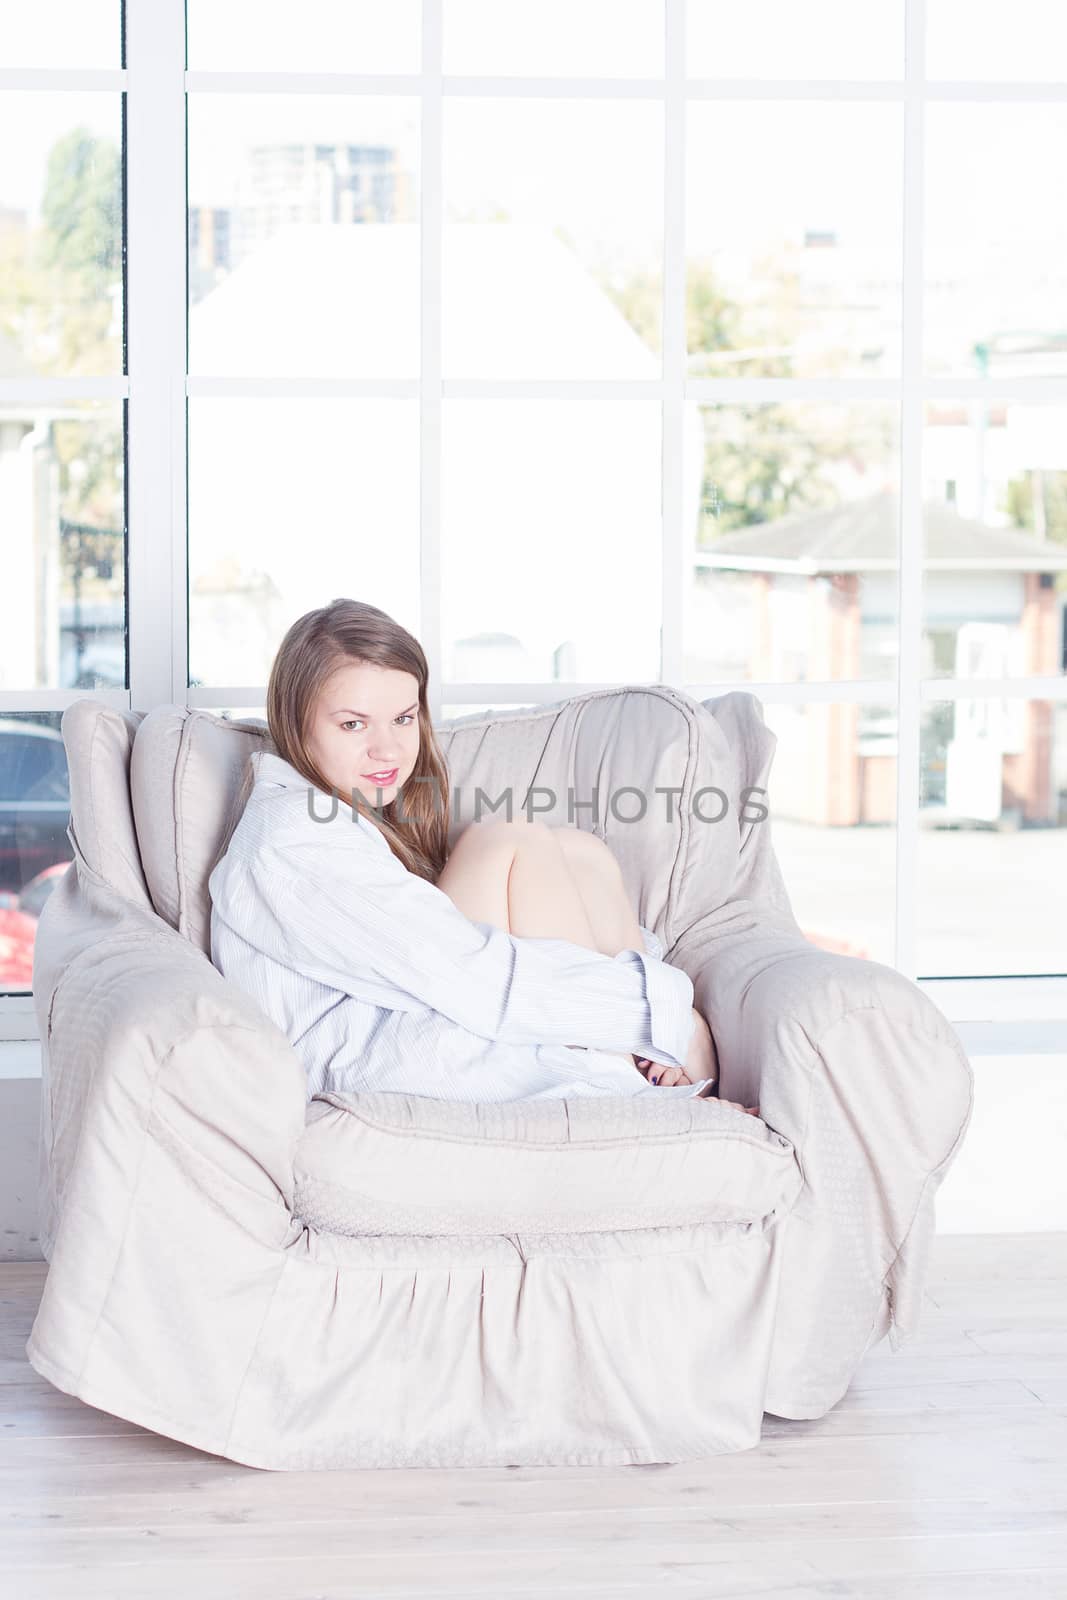 Young woman at home sitting on modern chair in front of window relaxing in her living room